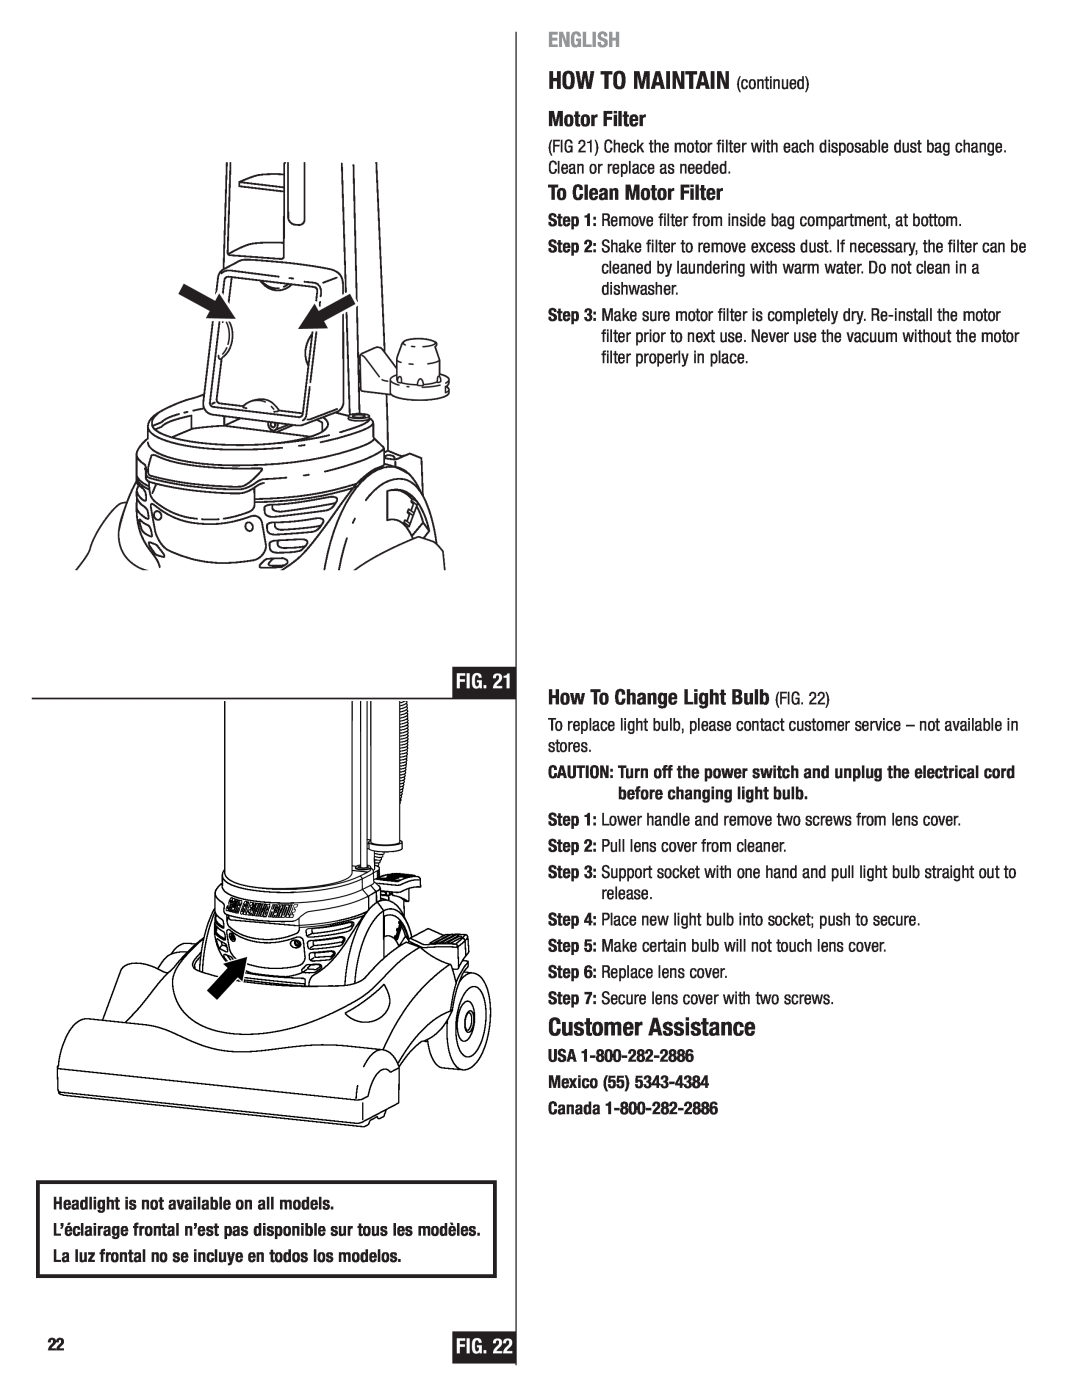 Eureka 4750 manual HOW TO MAINTAIN continued, To Clean Motor Filter, How To Change Light Bulb FIG, Customer Assistance 